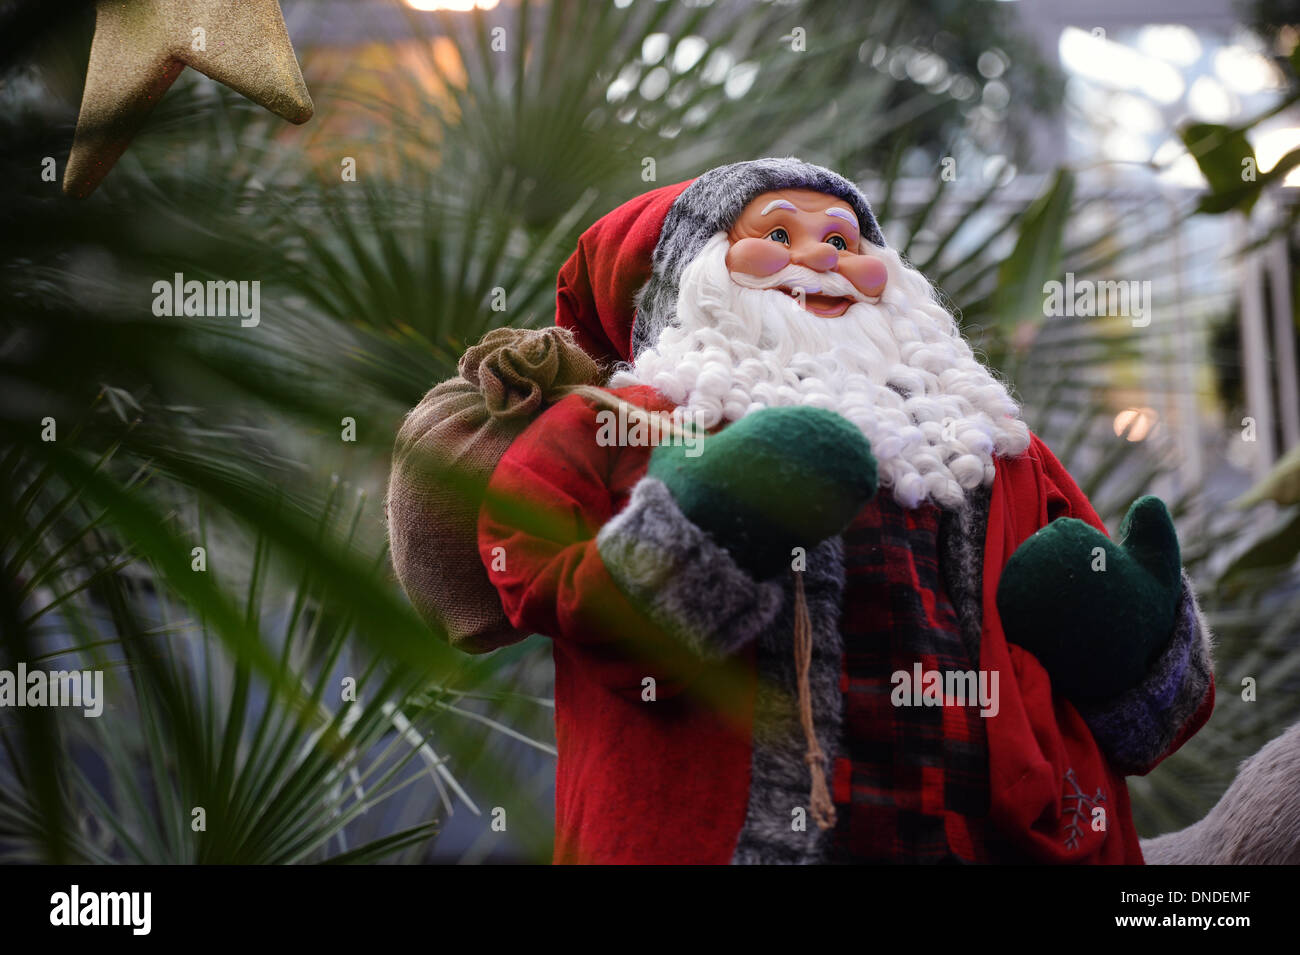 Frankfurt Main, Germany. 17th Dec, 2013. A Father Christmas figure stands between palm trees in the foyer of the palm garden in Frankfurt Main, Germany, 17 December 2013. Photo: Andreas Arnold/dpa/Alamy Live News Stock Photo